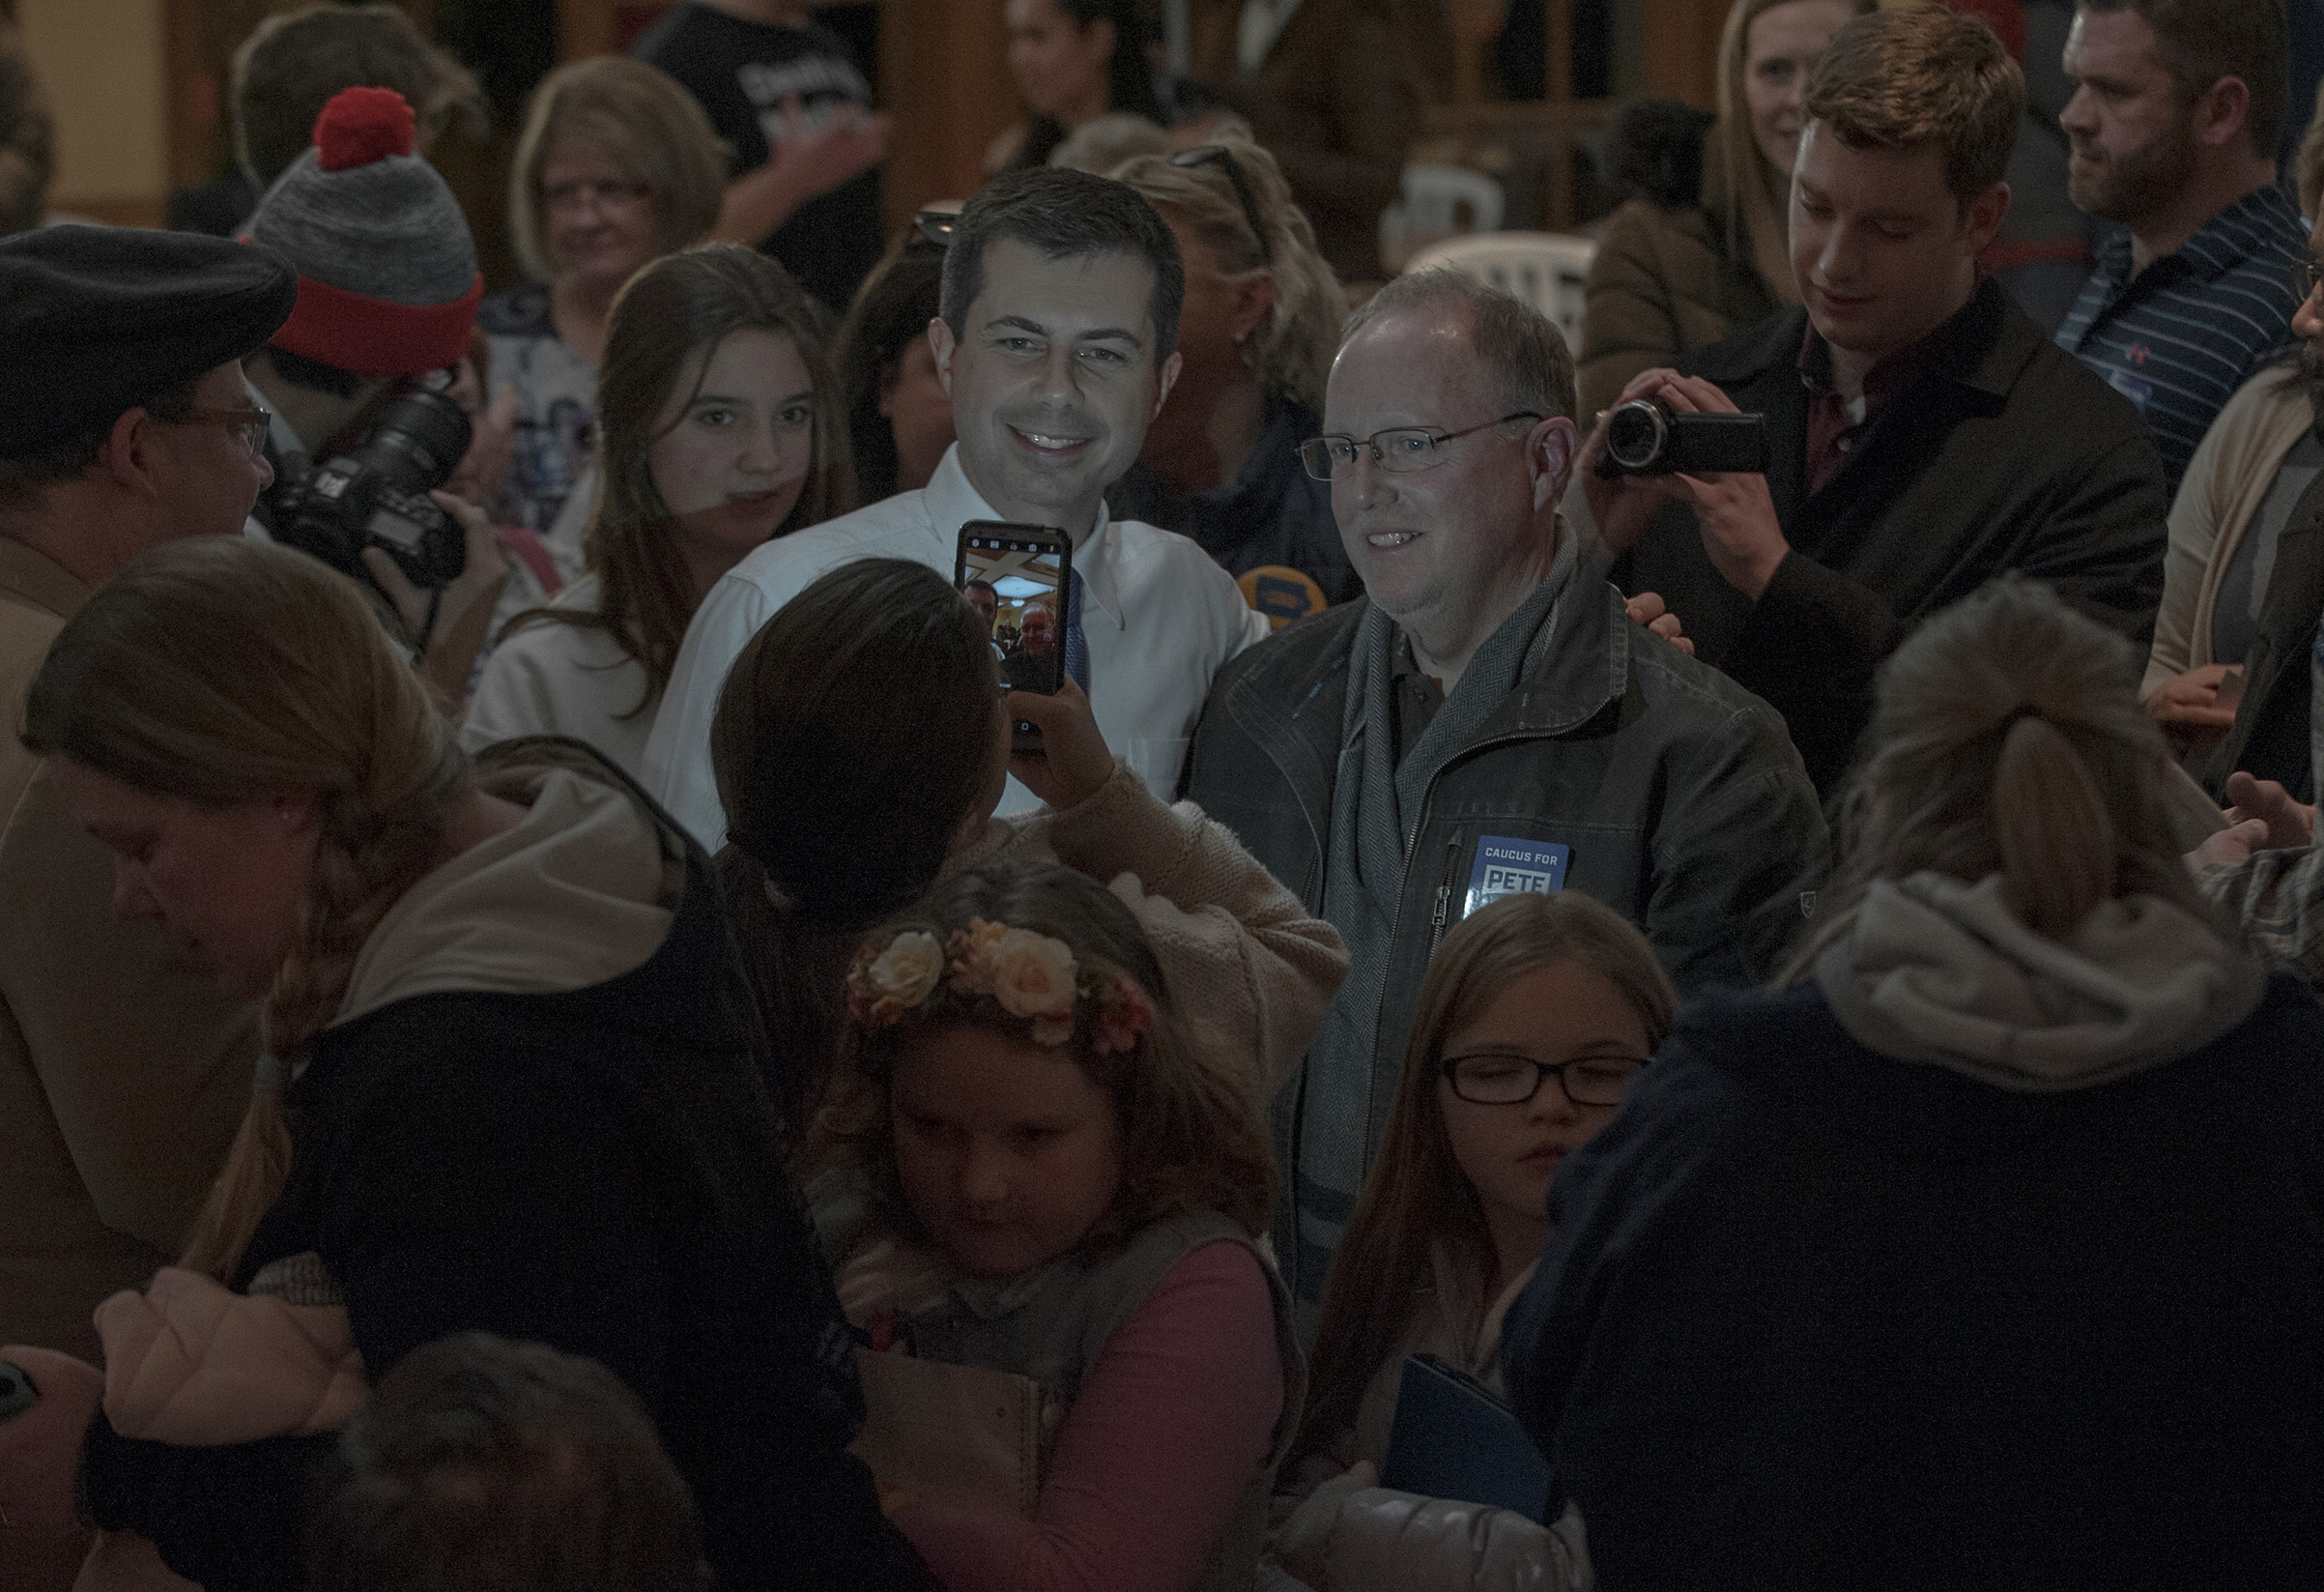 Buttigieg meets supporters at a Town Hall in Mason City, Iowa, on Jan. 29. (September Dawn Bottoms for TIME)